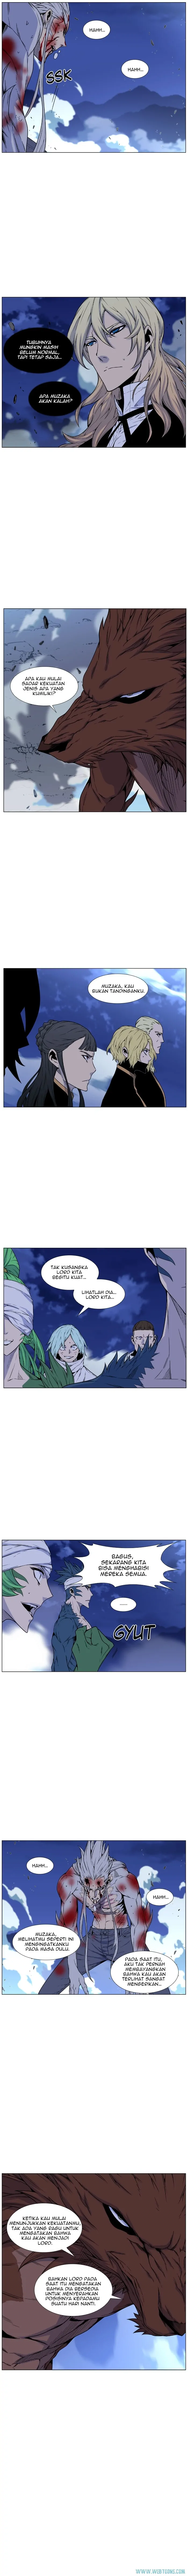 Noblesse Chapter 465 - 83